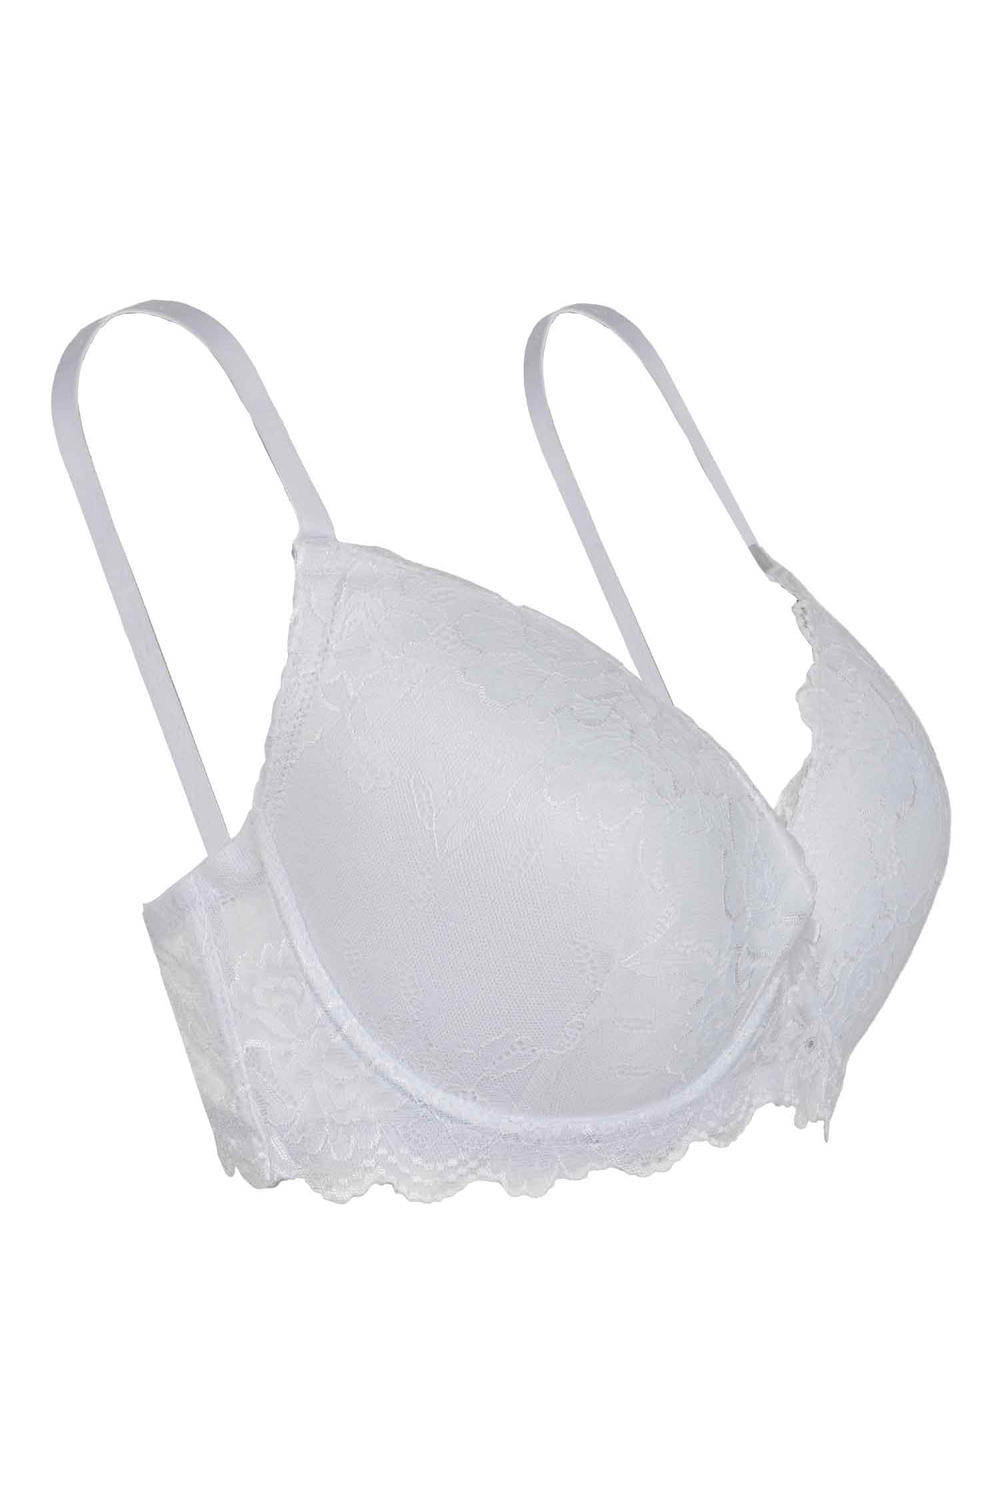 All-over lace push-up bra - White - Plus Size